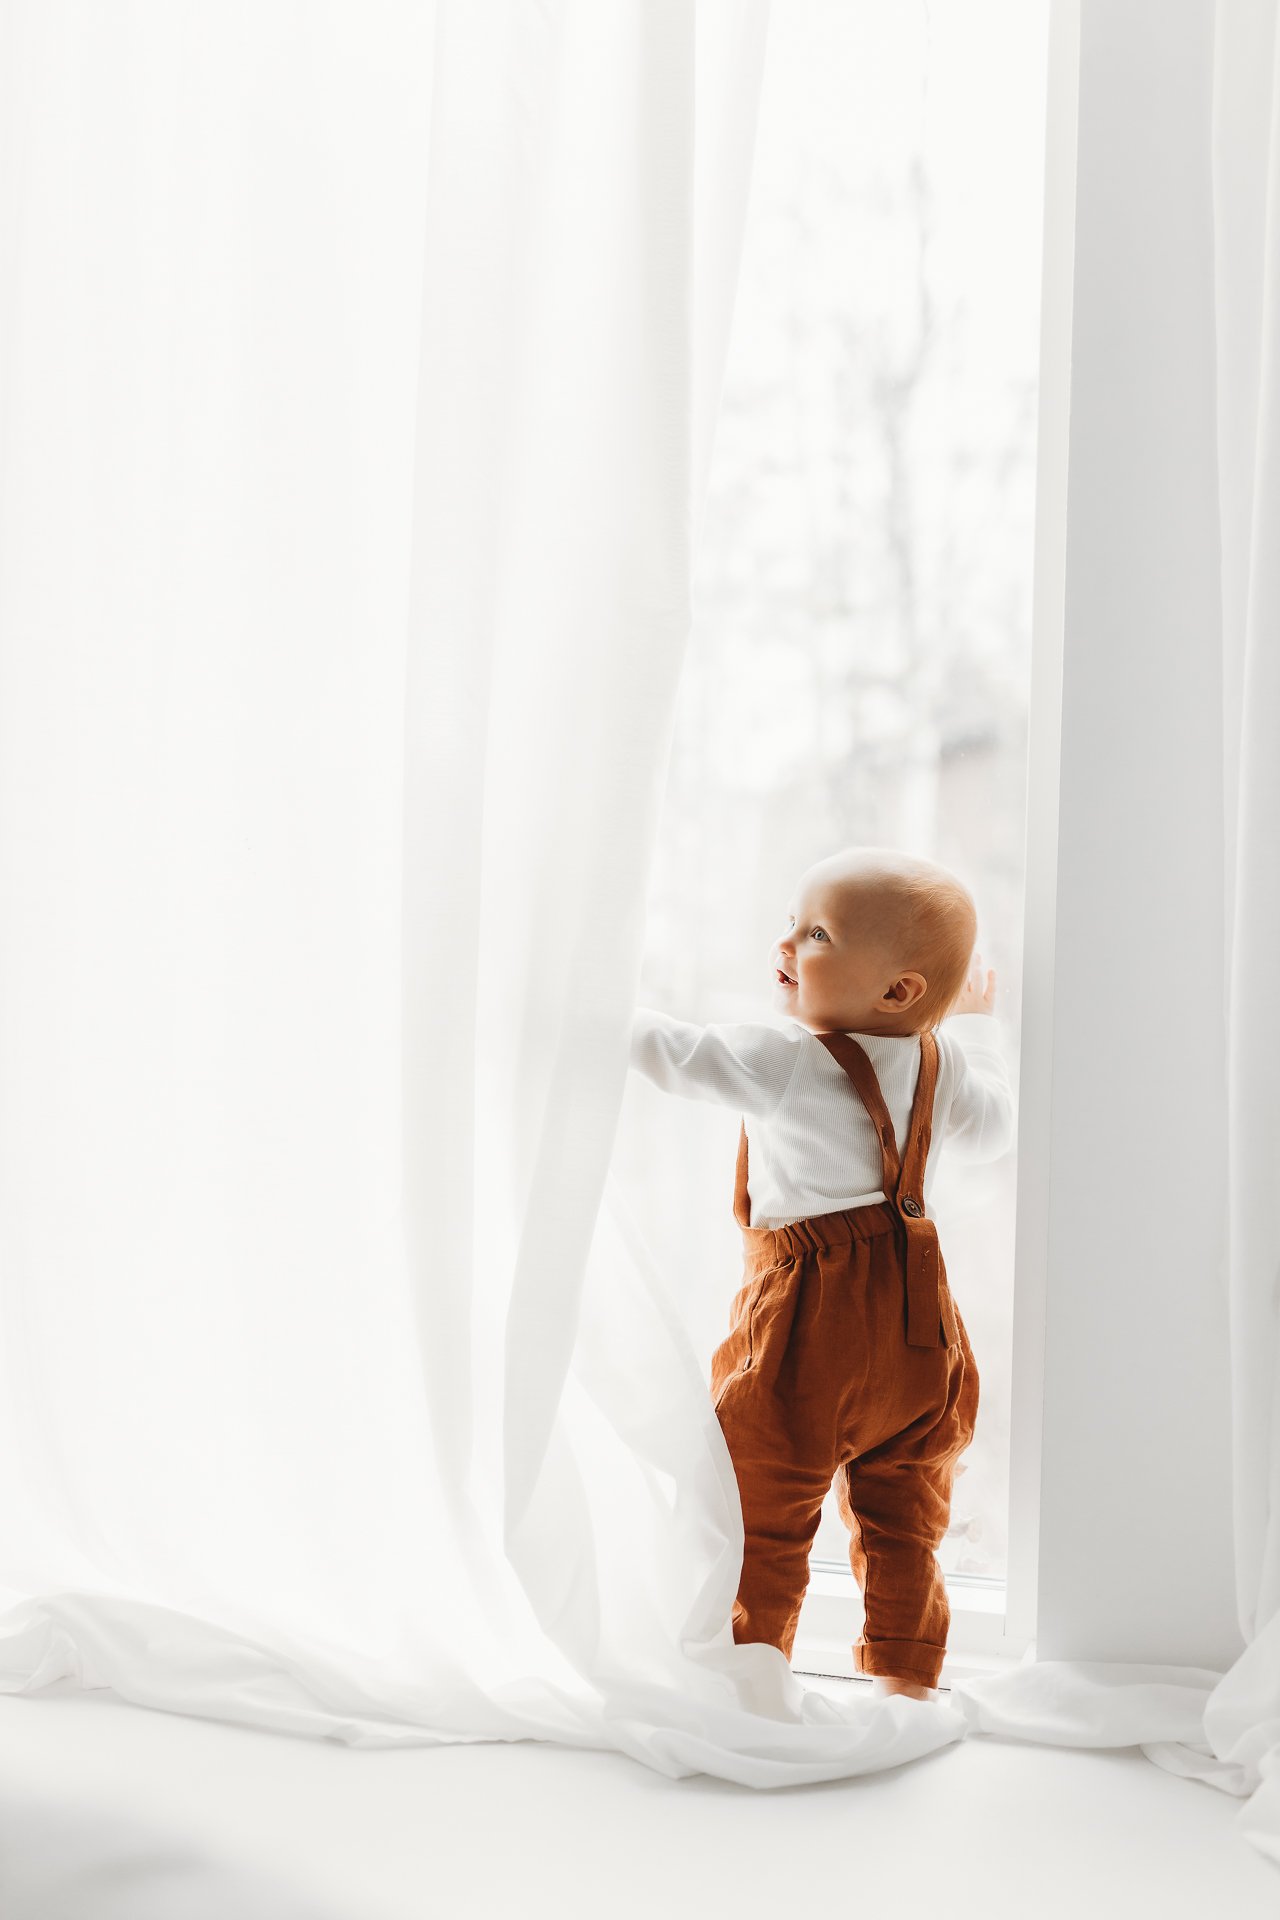 Photographing kids with natural light